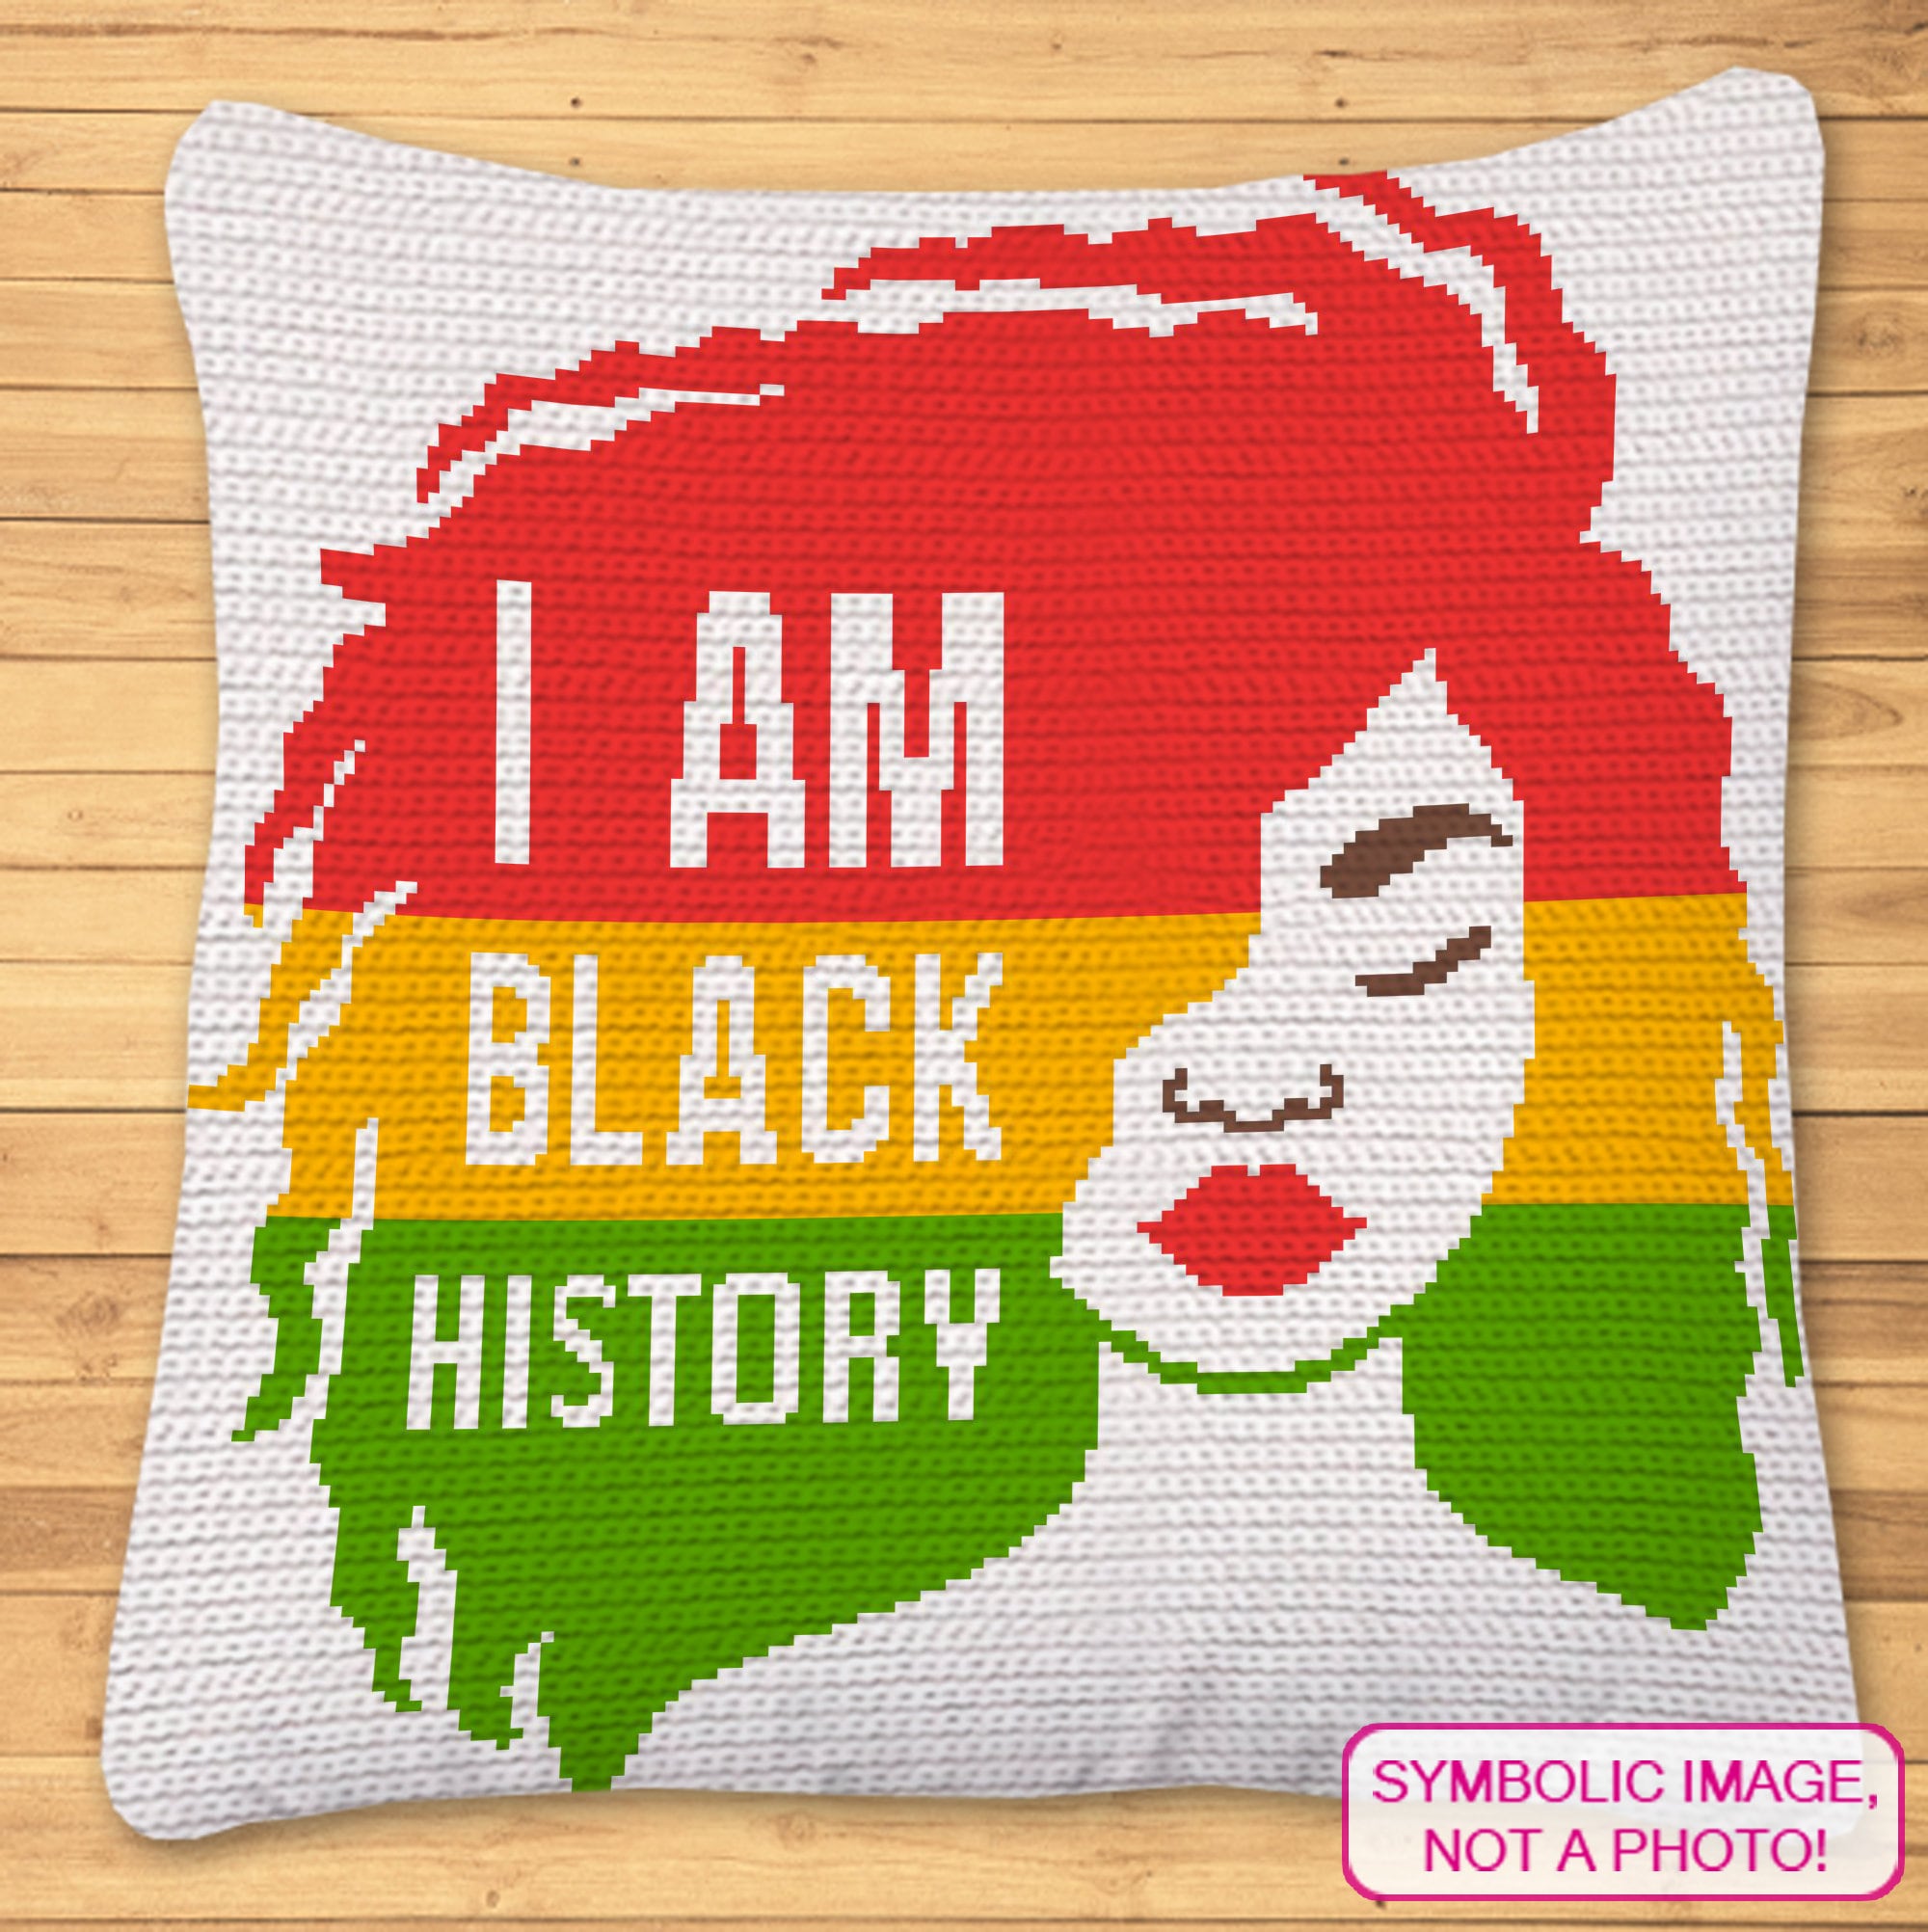 I Am Black History Crochet Blanket and Pillow - Weave culture & pride! African-inspired motifs, vibrant colors. Add heritage to your space. African Crochet is a Graph Pattern with Written Instructions for Crochet Blanket and Pillow, PDF Digital Files. Click to learn more!